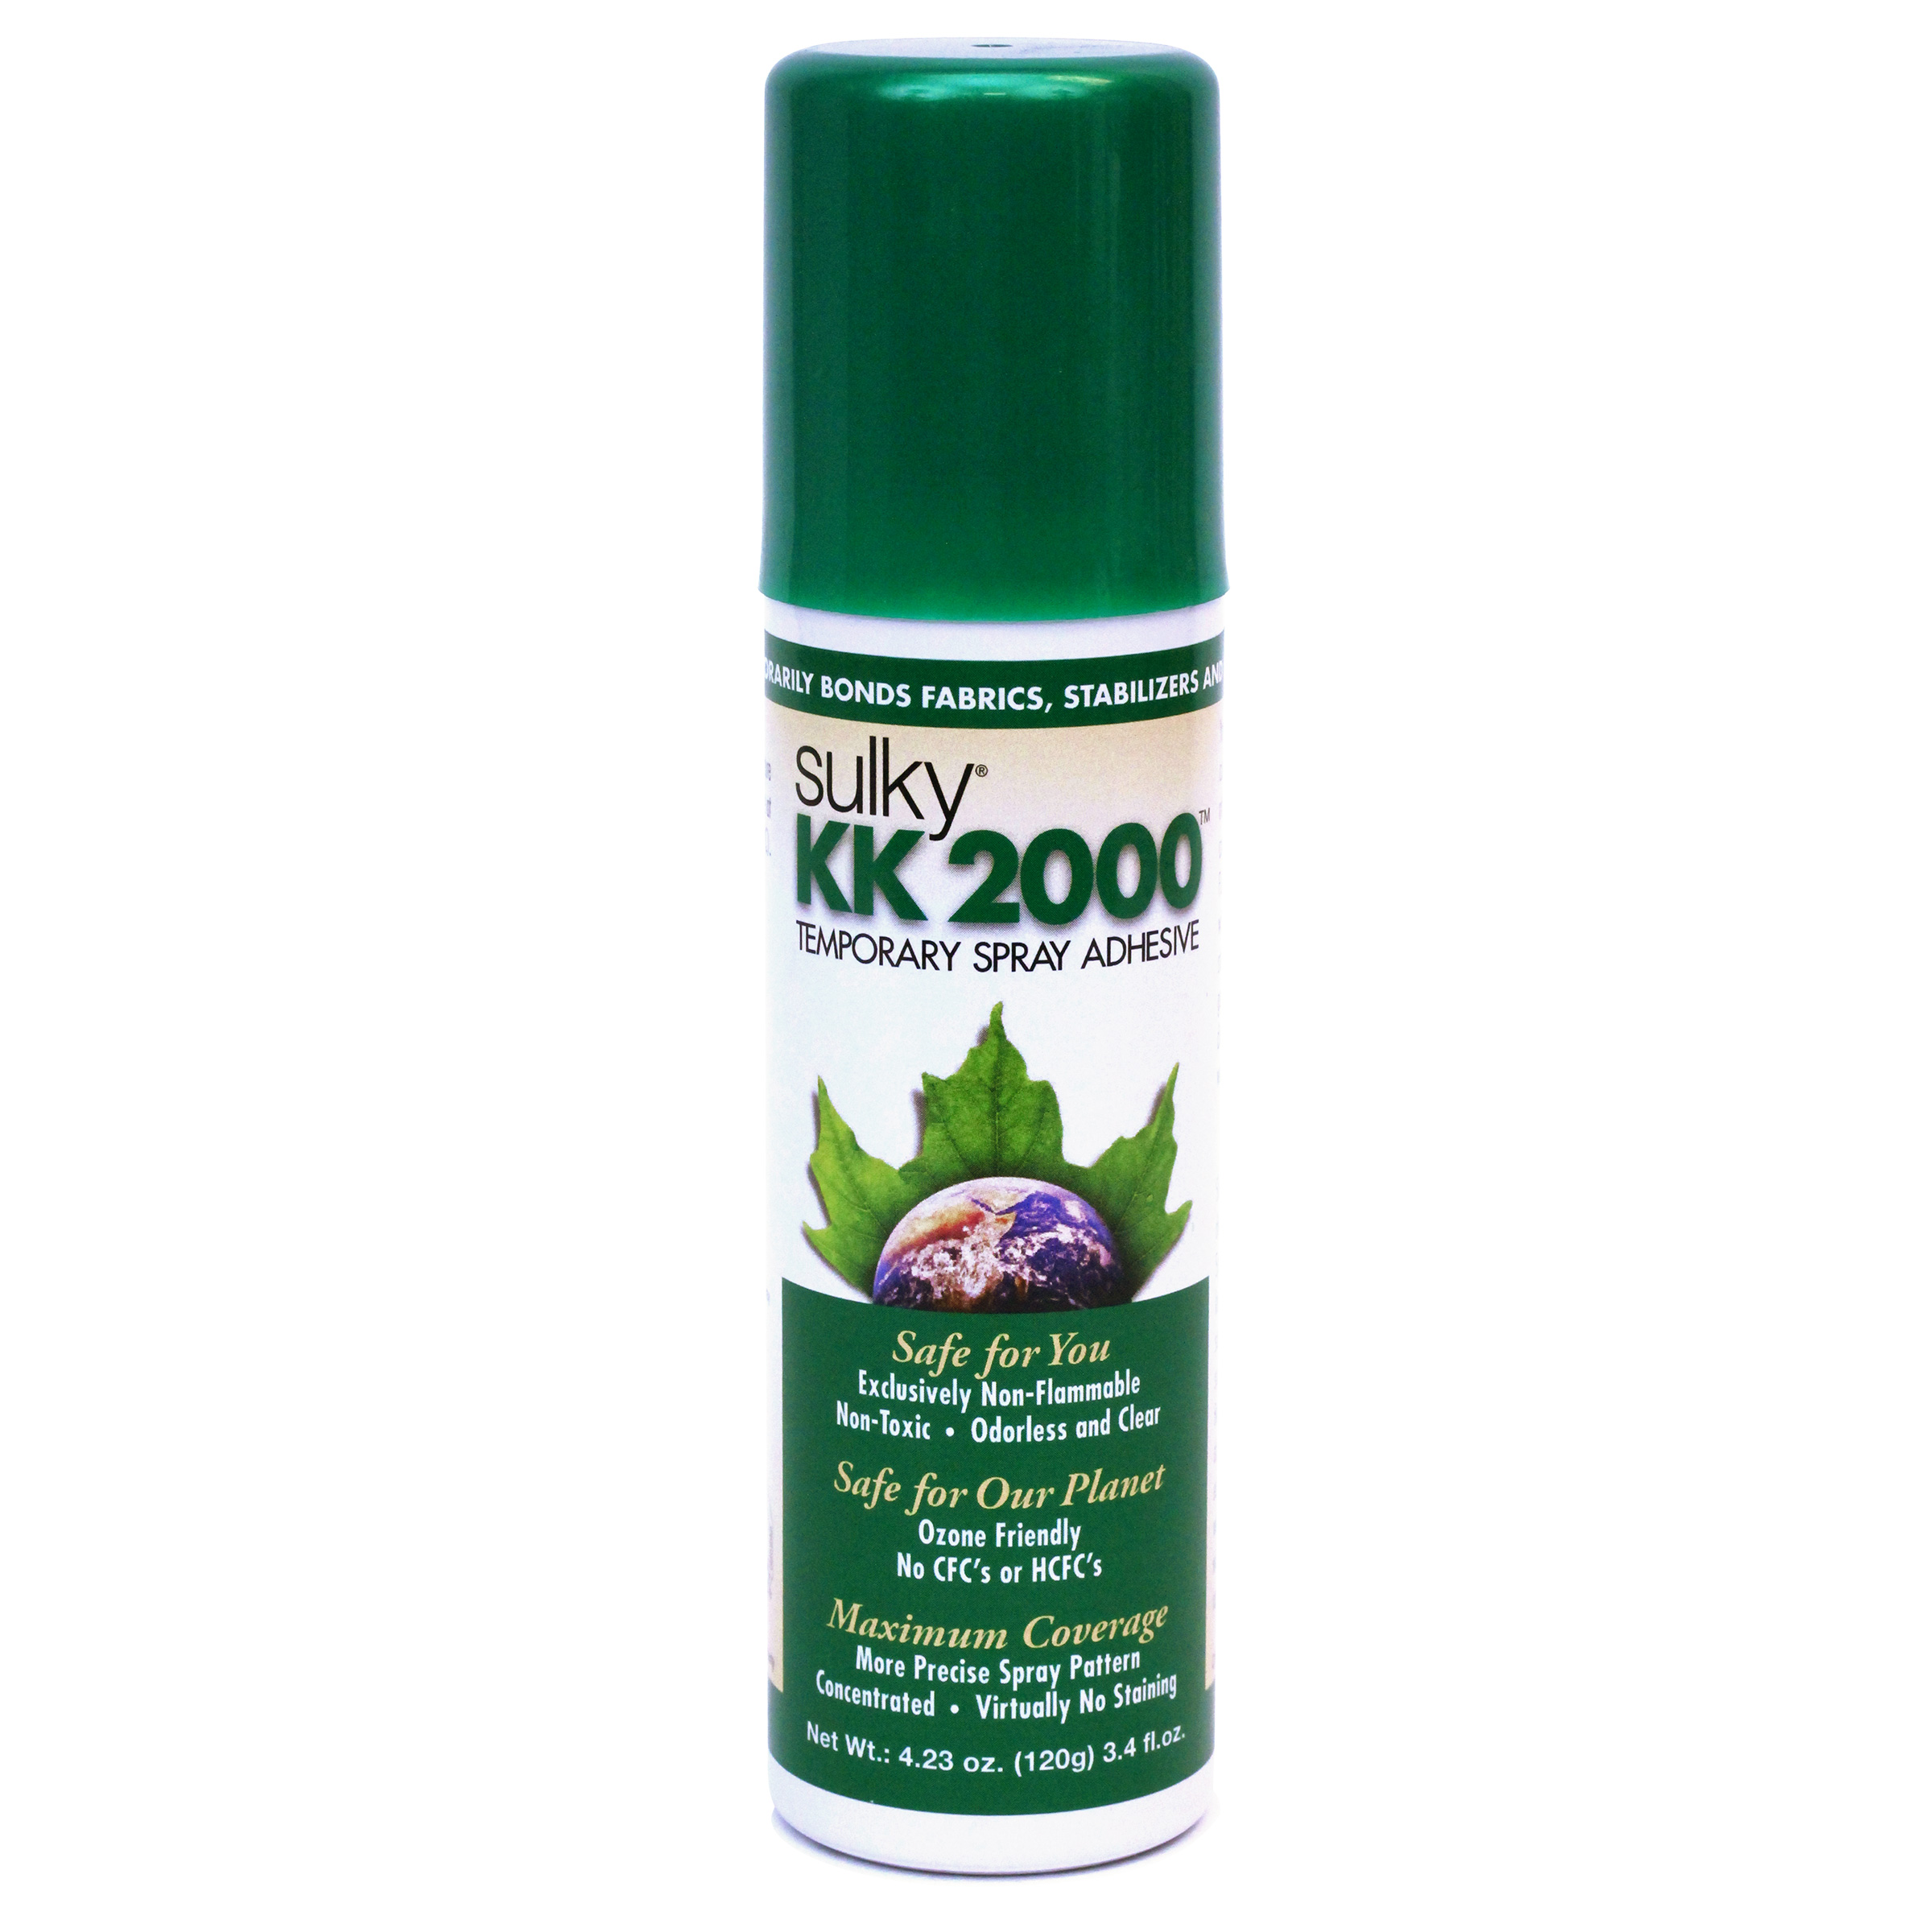 What is the ingredients list for KK 2000?